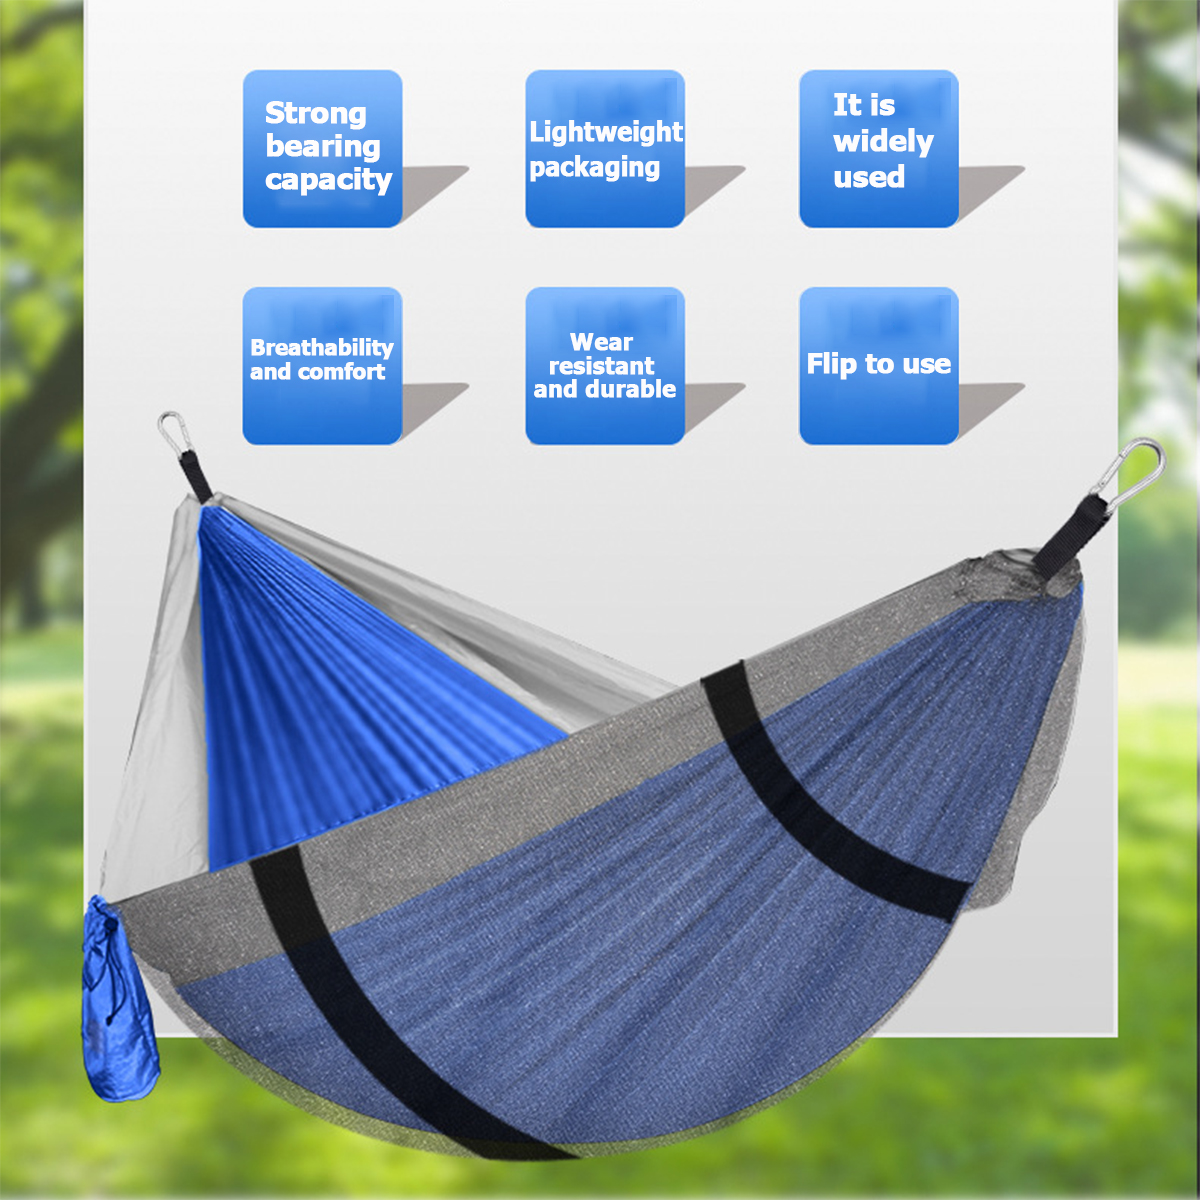 2-People-Outdoor-Camping-Nylon-Strong-Hammock-W-Mosquito-Net-Travel-Portable-Backpack-Hammock-Max-Lo-1732116-3